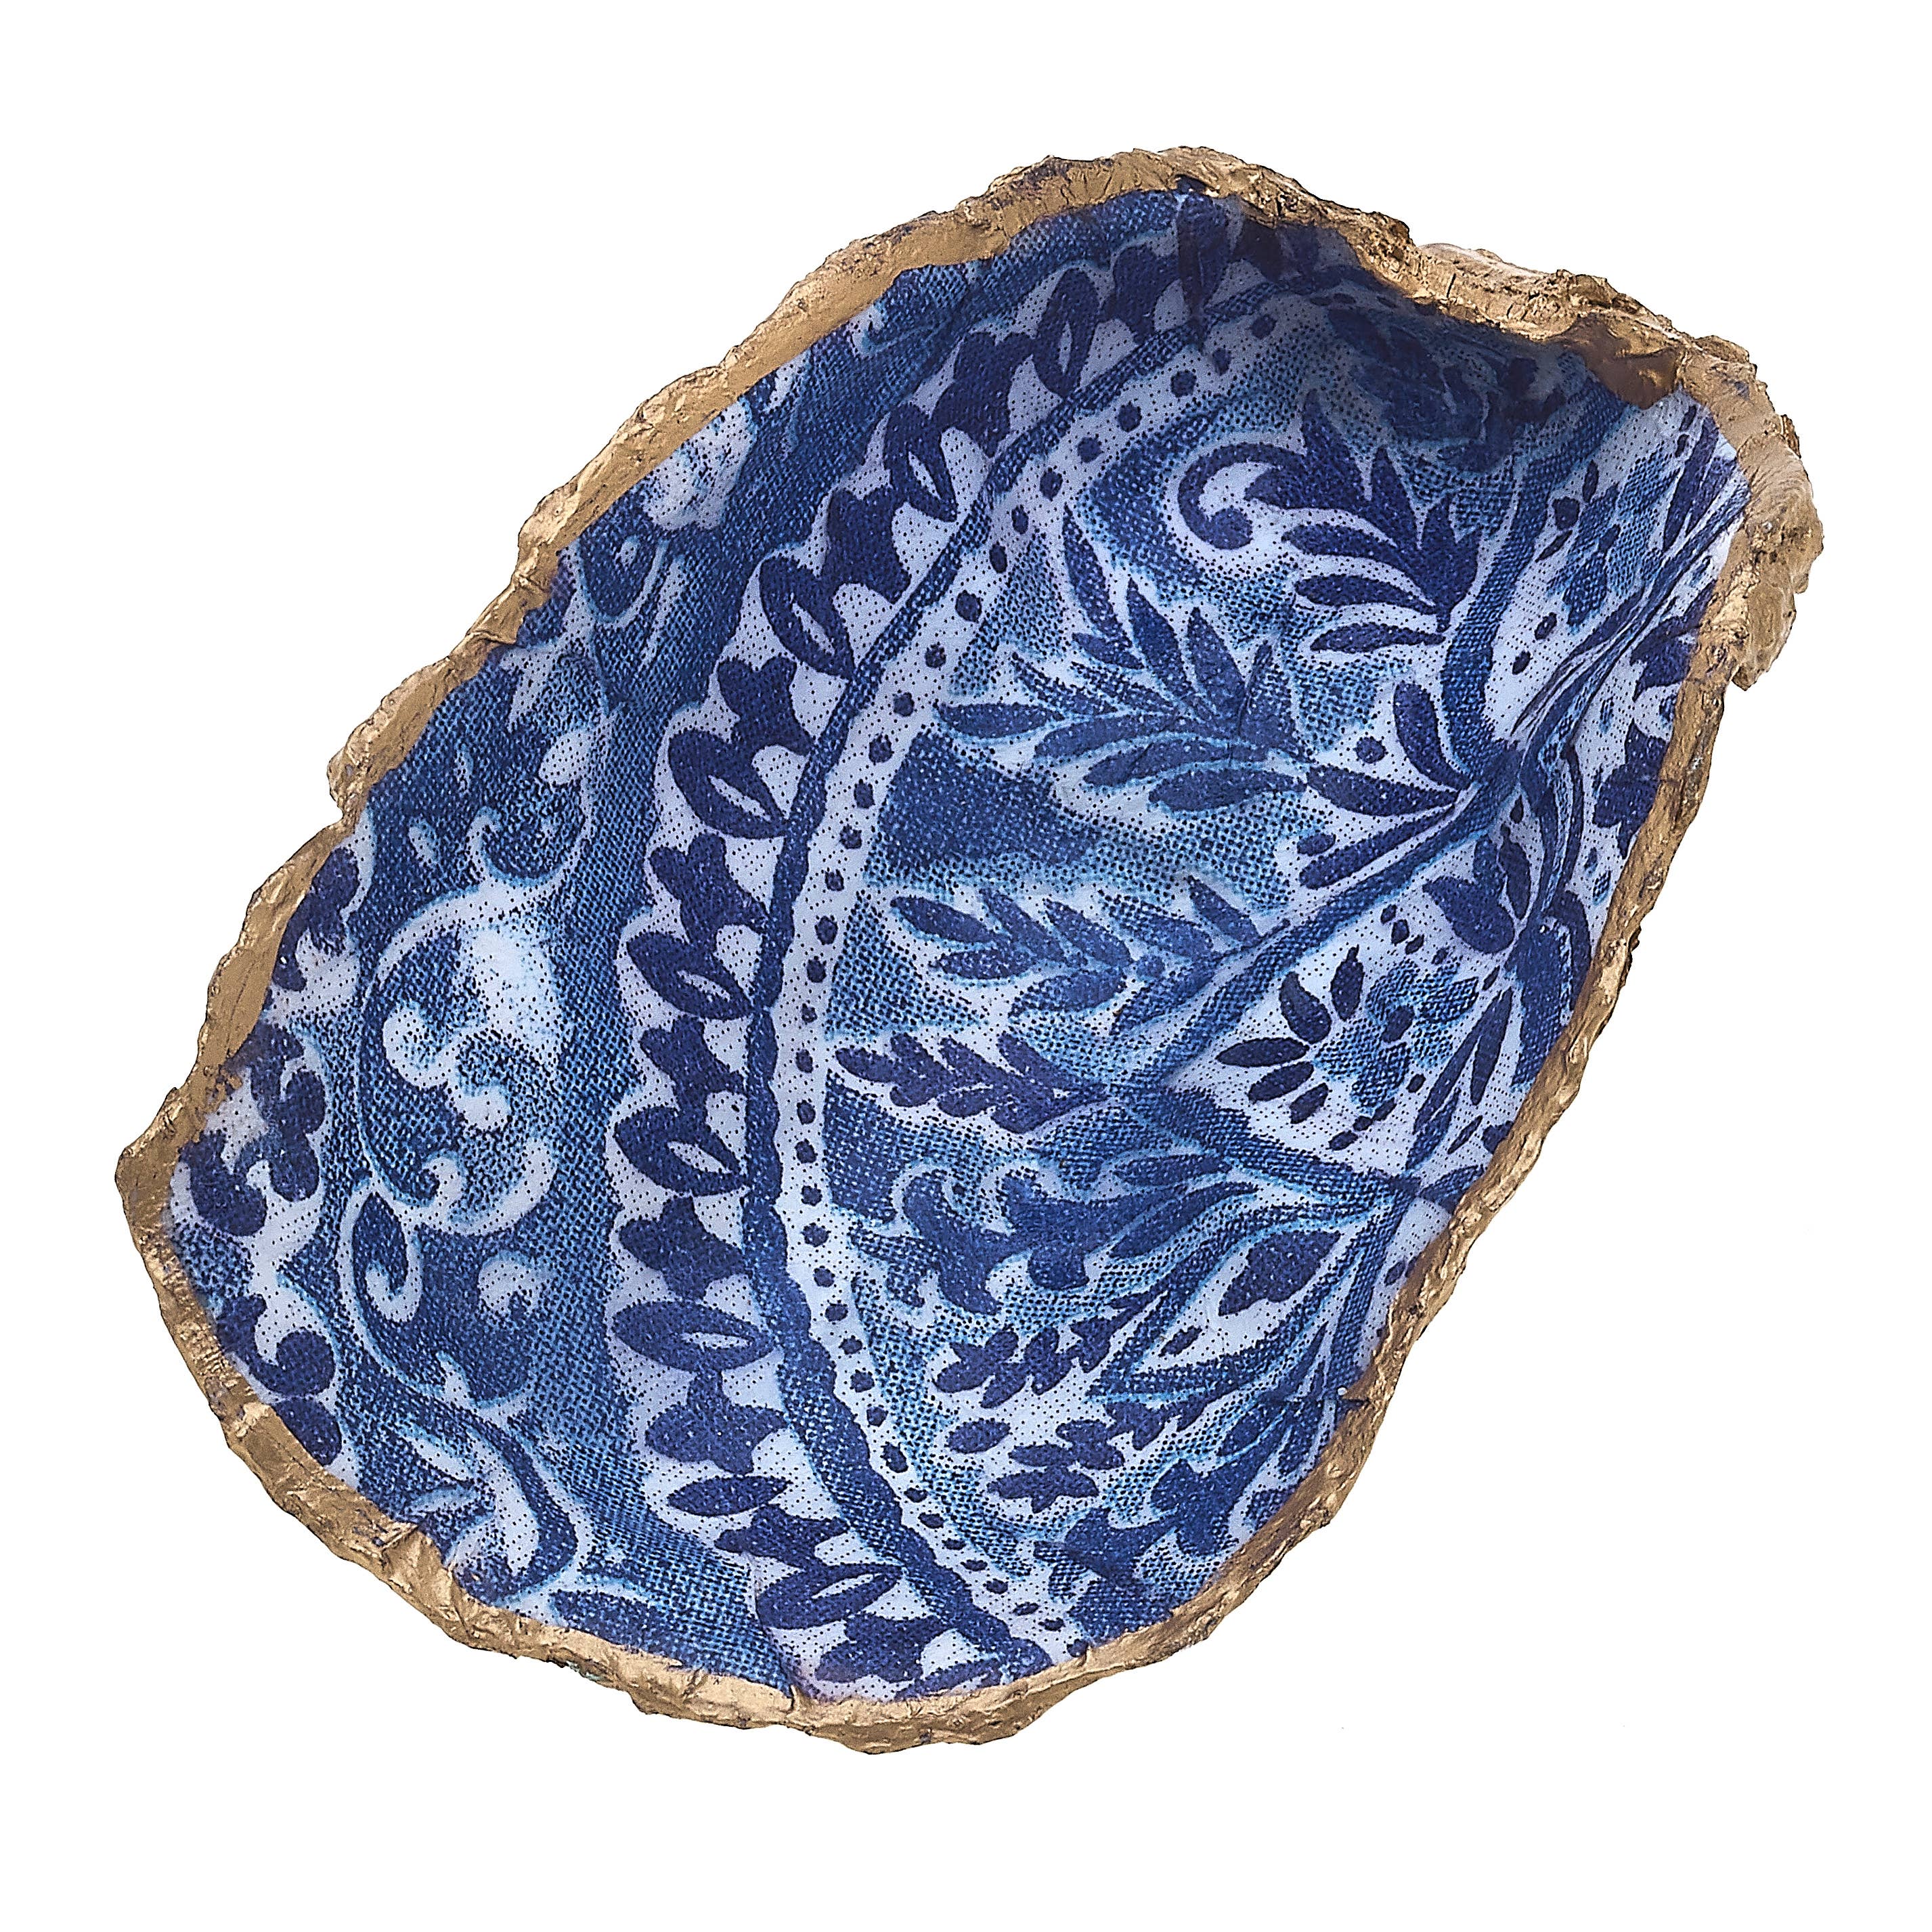 Catalina Decoupage Oyster Ring Tray in Blue & White